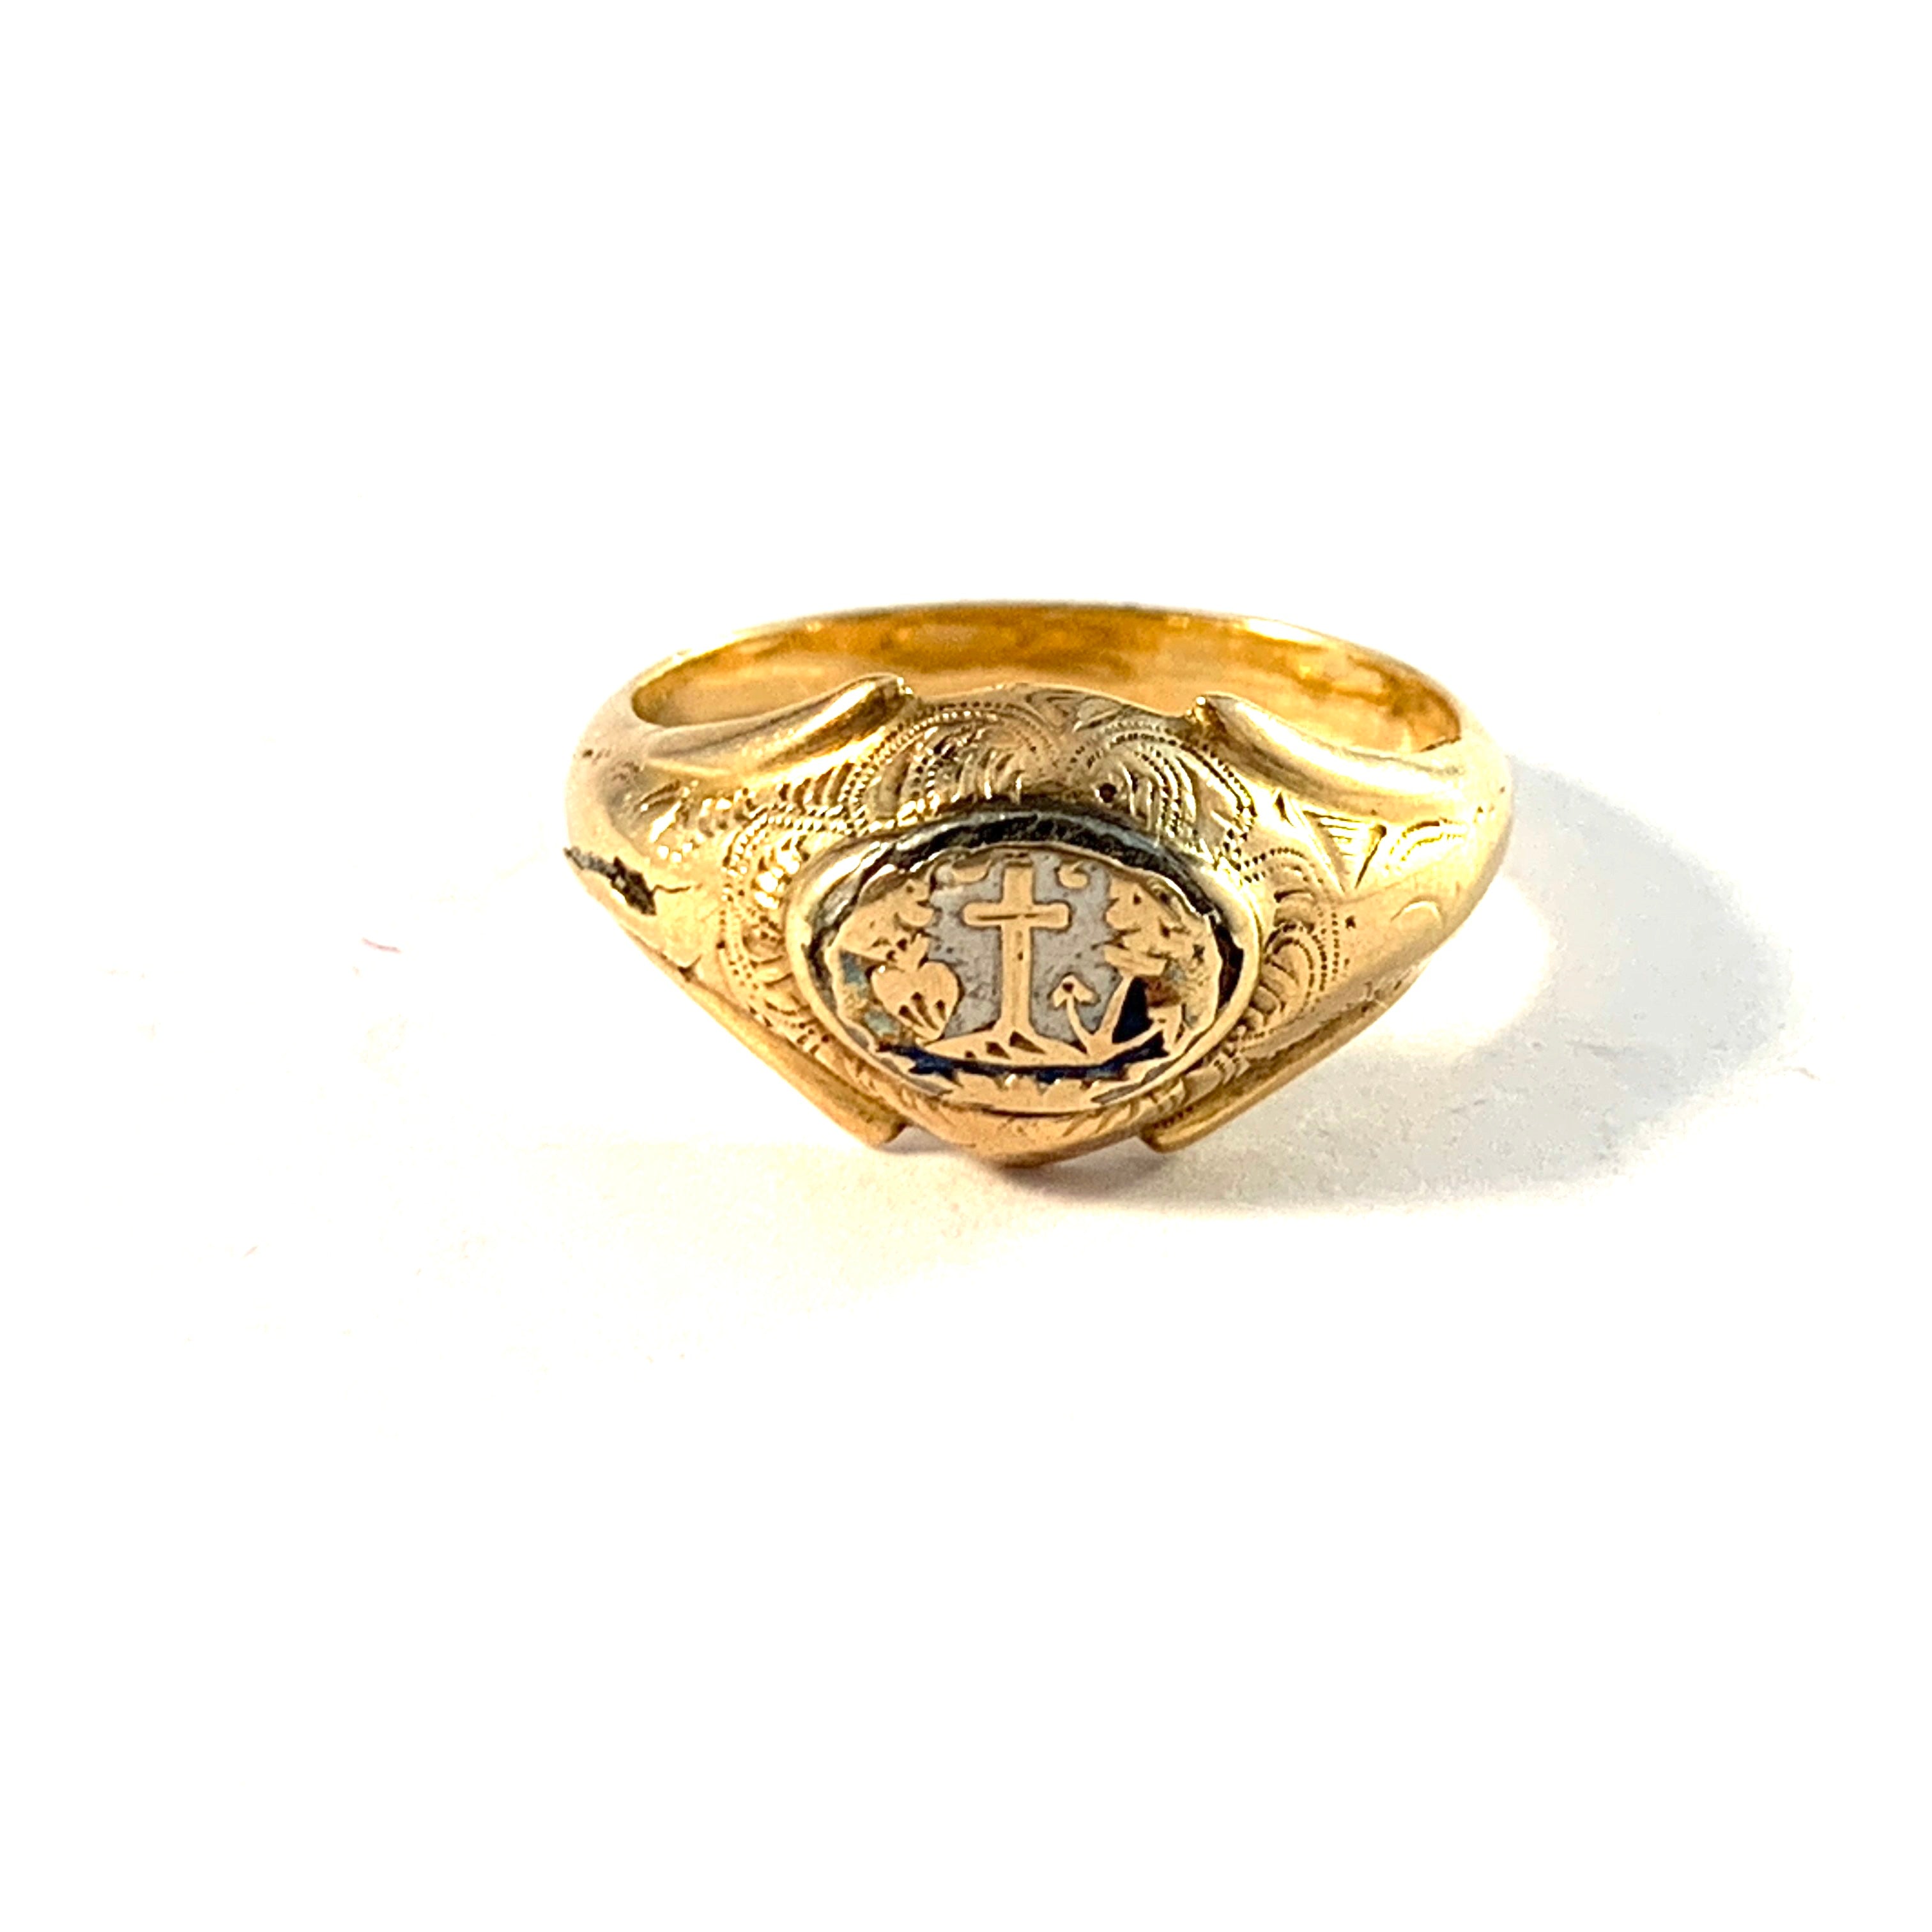 Sweden mid 1800s. Antique 18k Gold Faith, Hope and Love Ring.